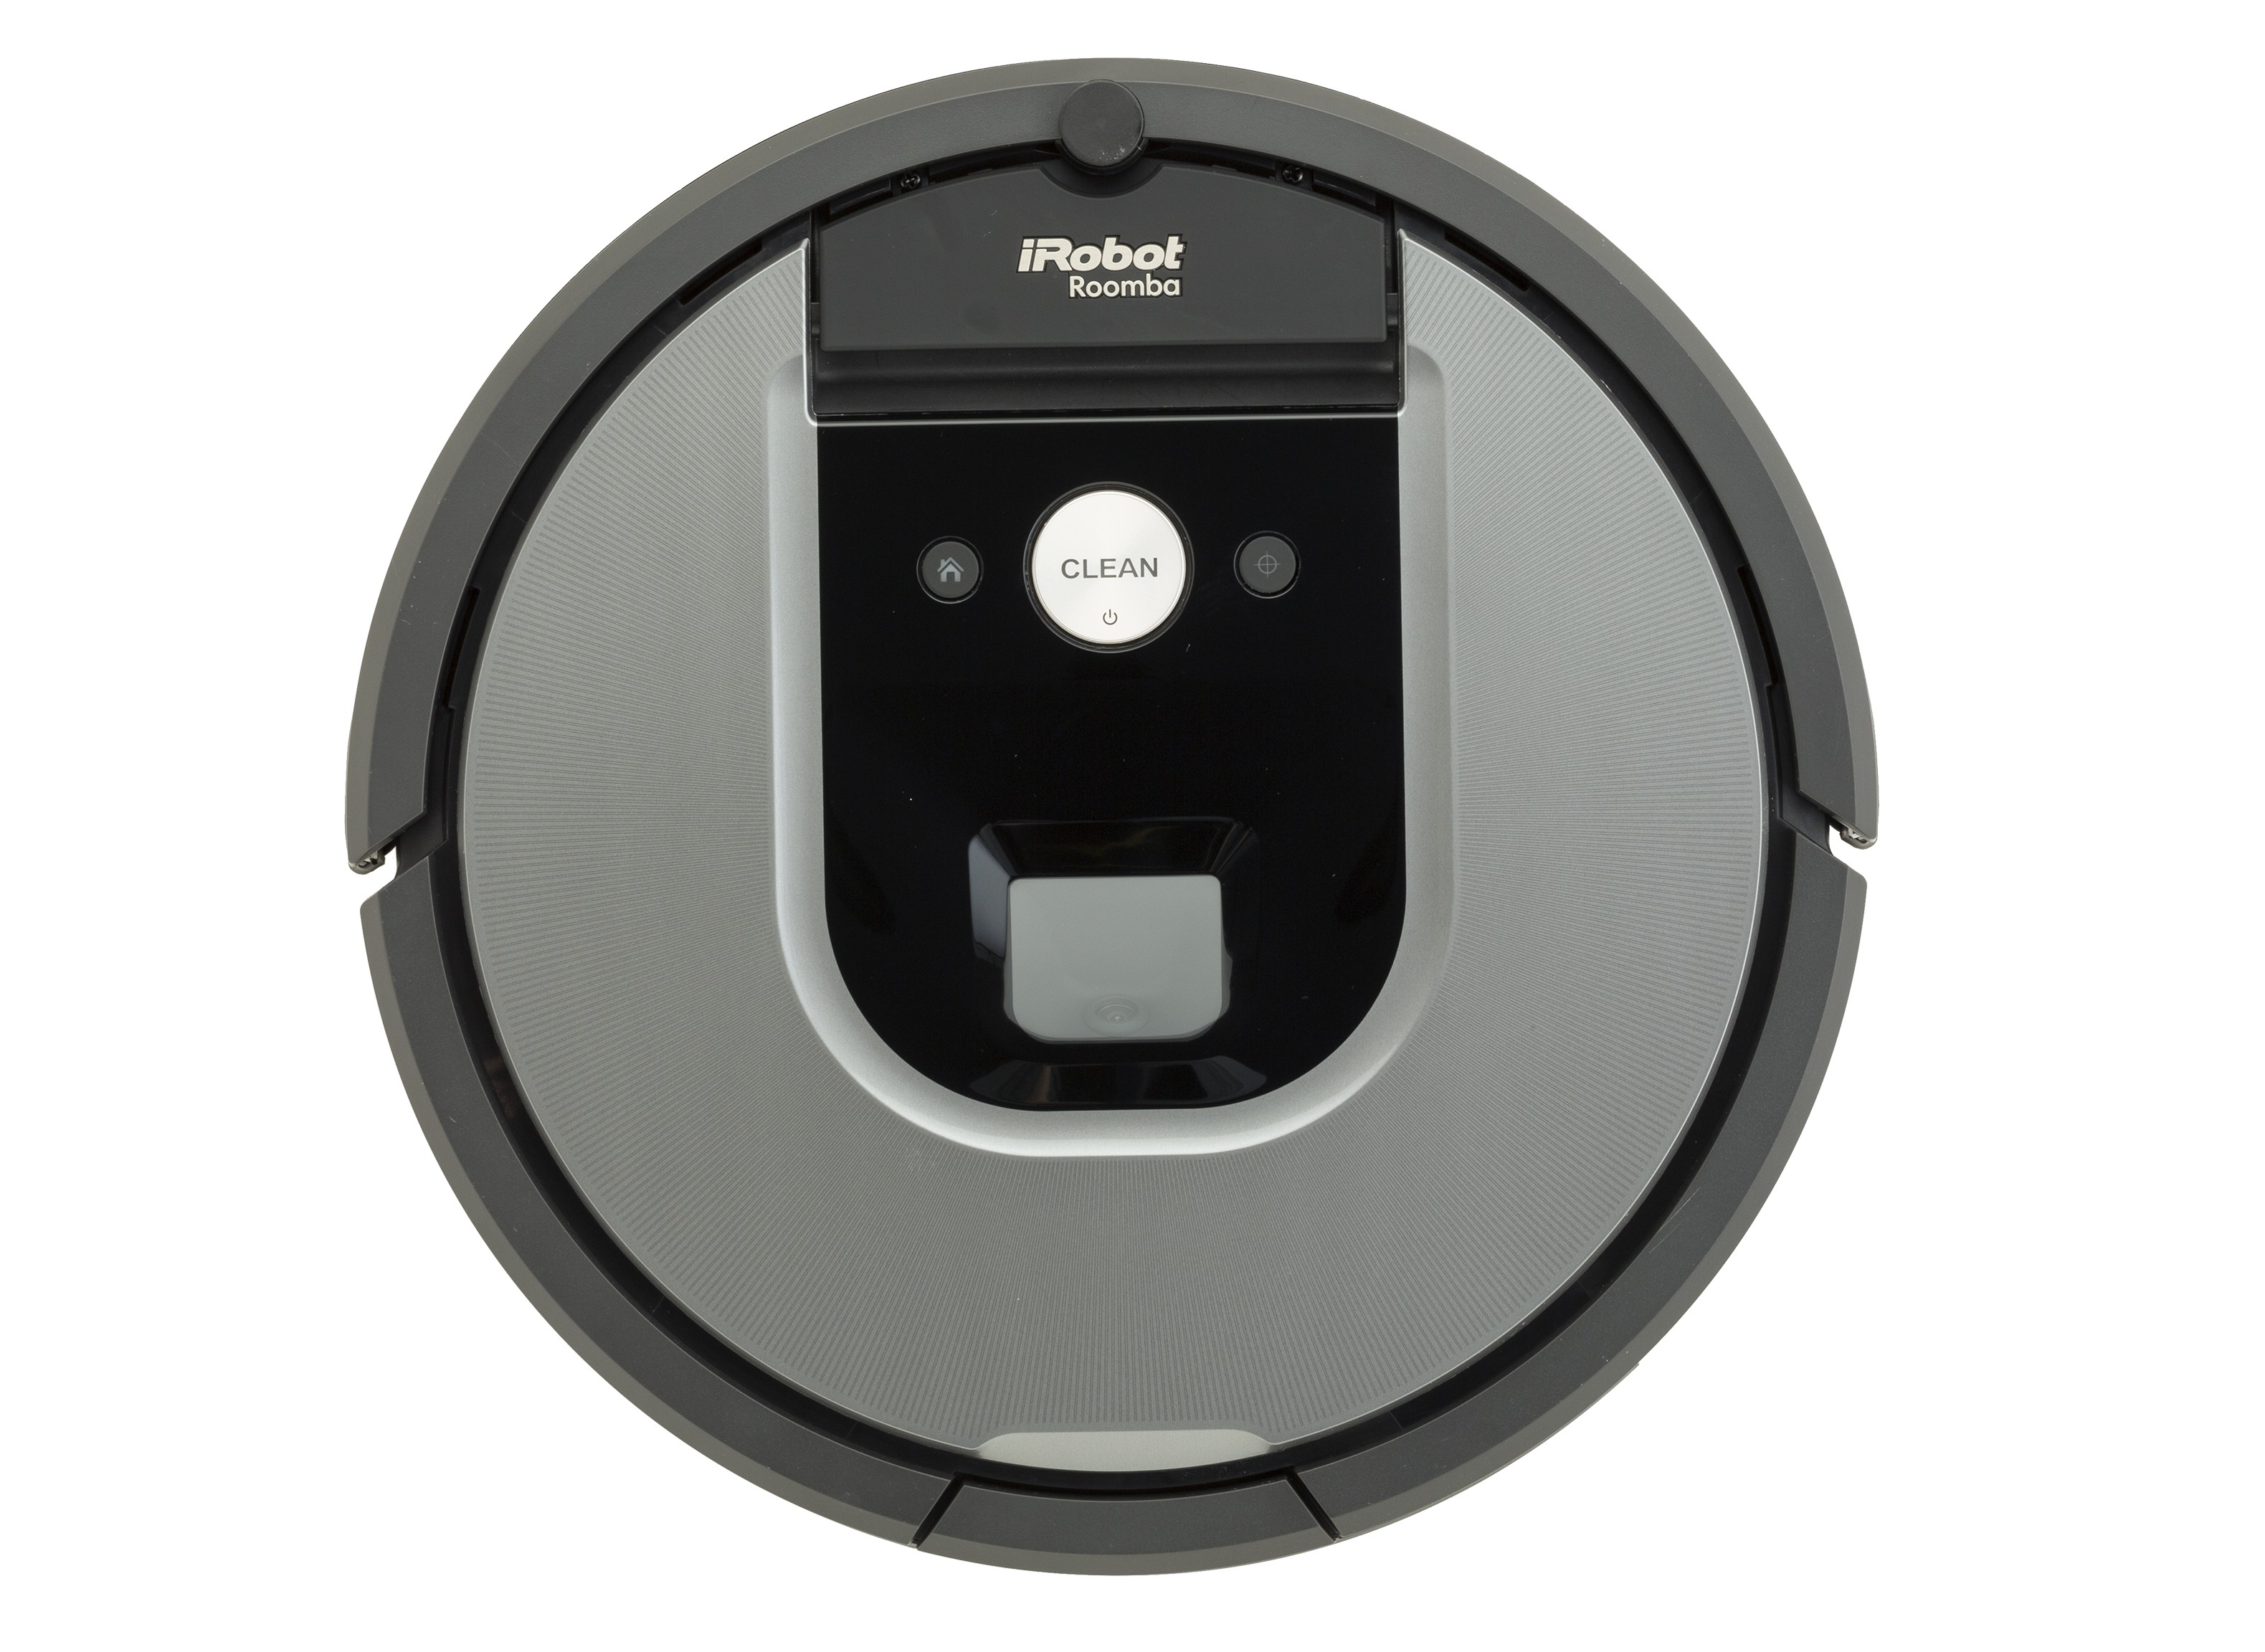 Roomba 960 Cleaner Review - Consumer Reports